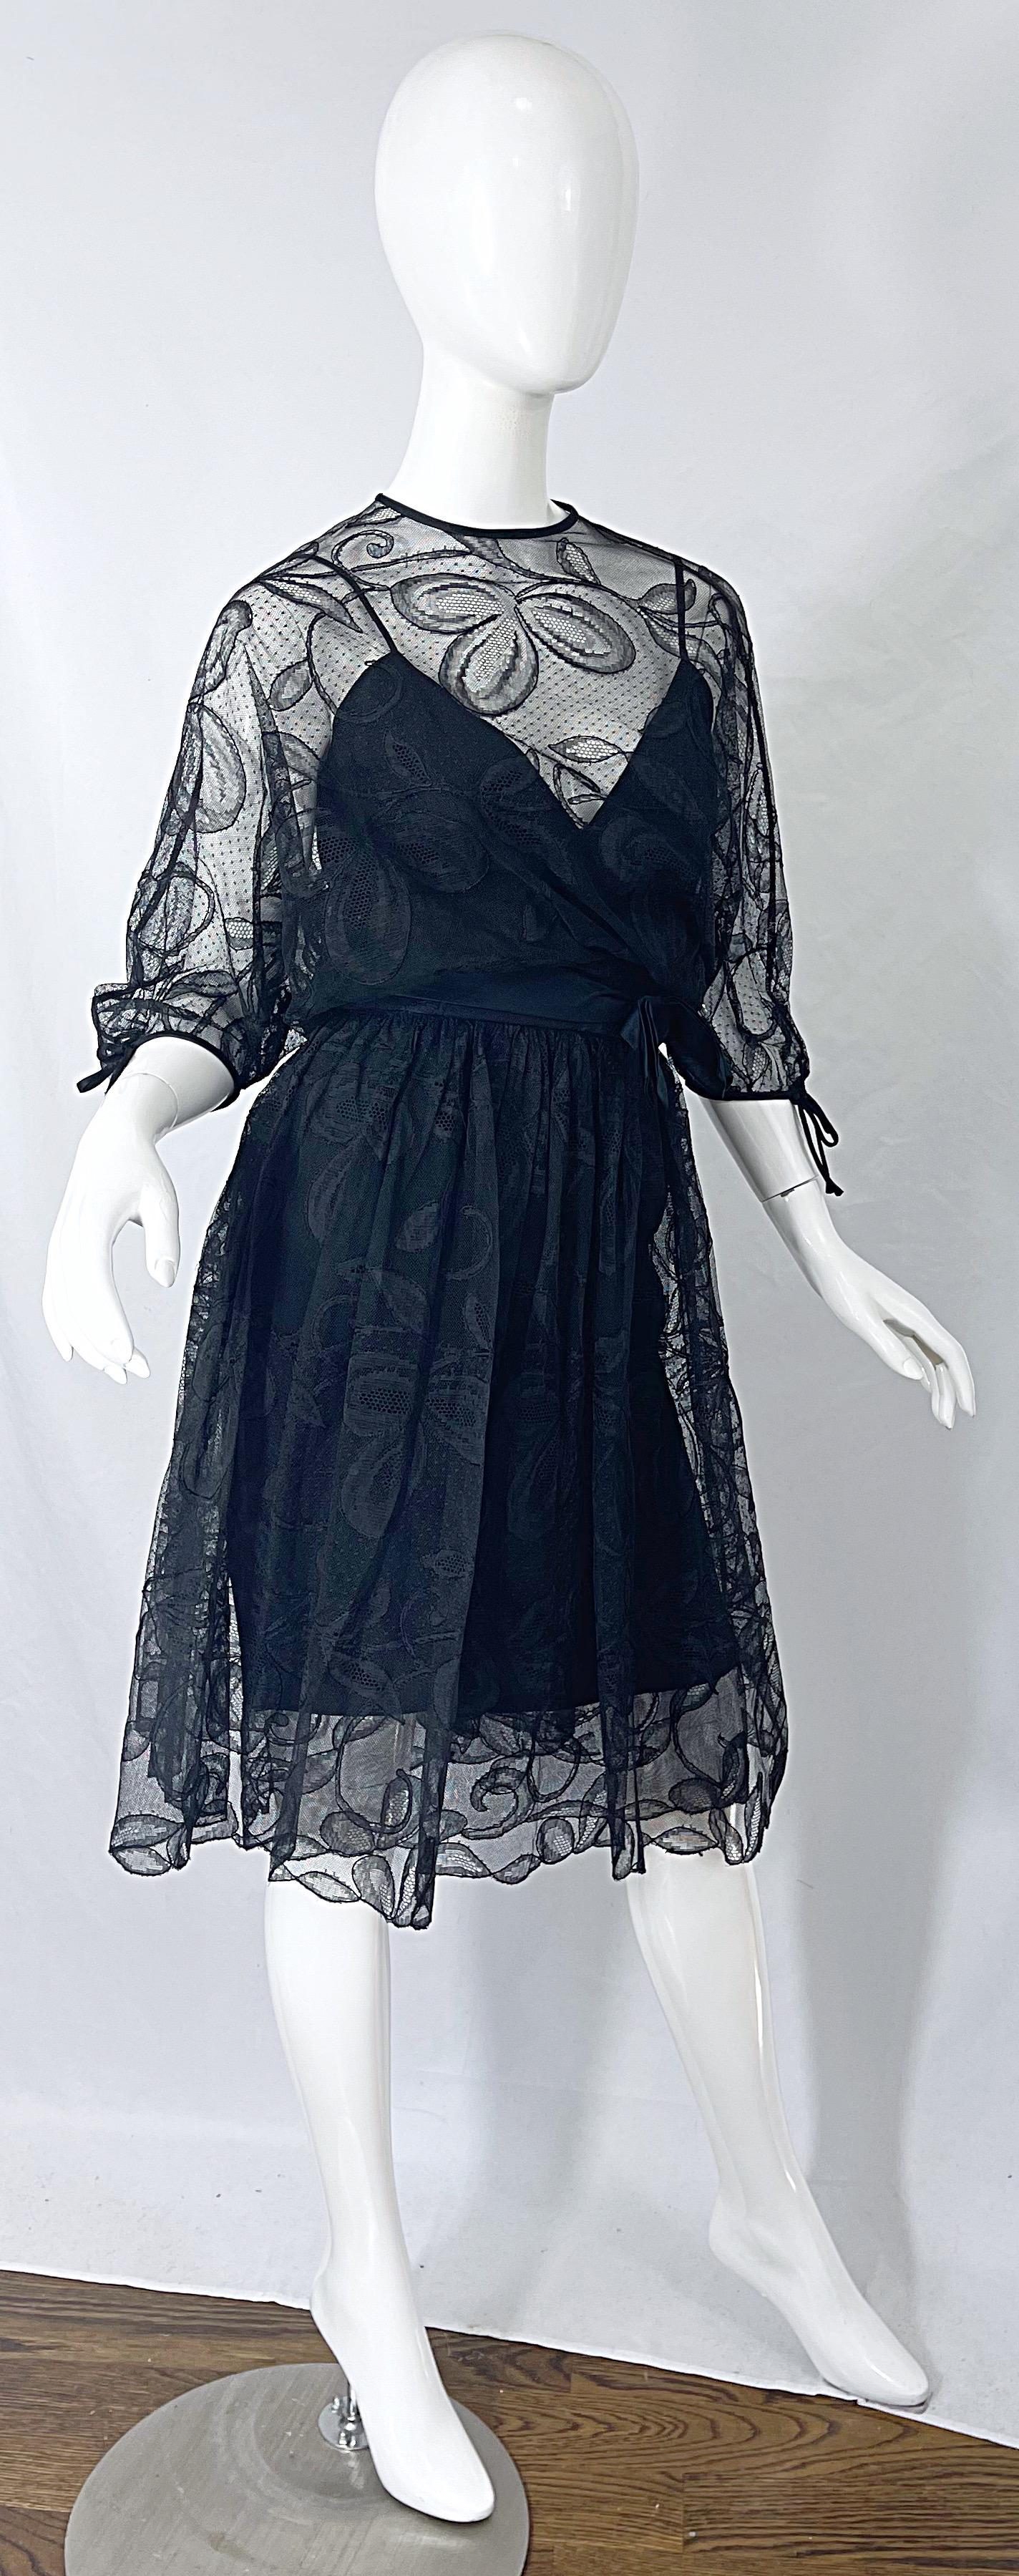 Women's 1960s Donald Brooks Black Lace Overlay 3/4 Sleeves Vintage 60s Dress For Sale